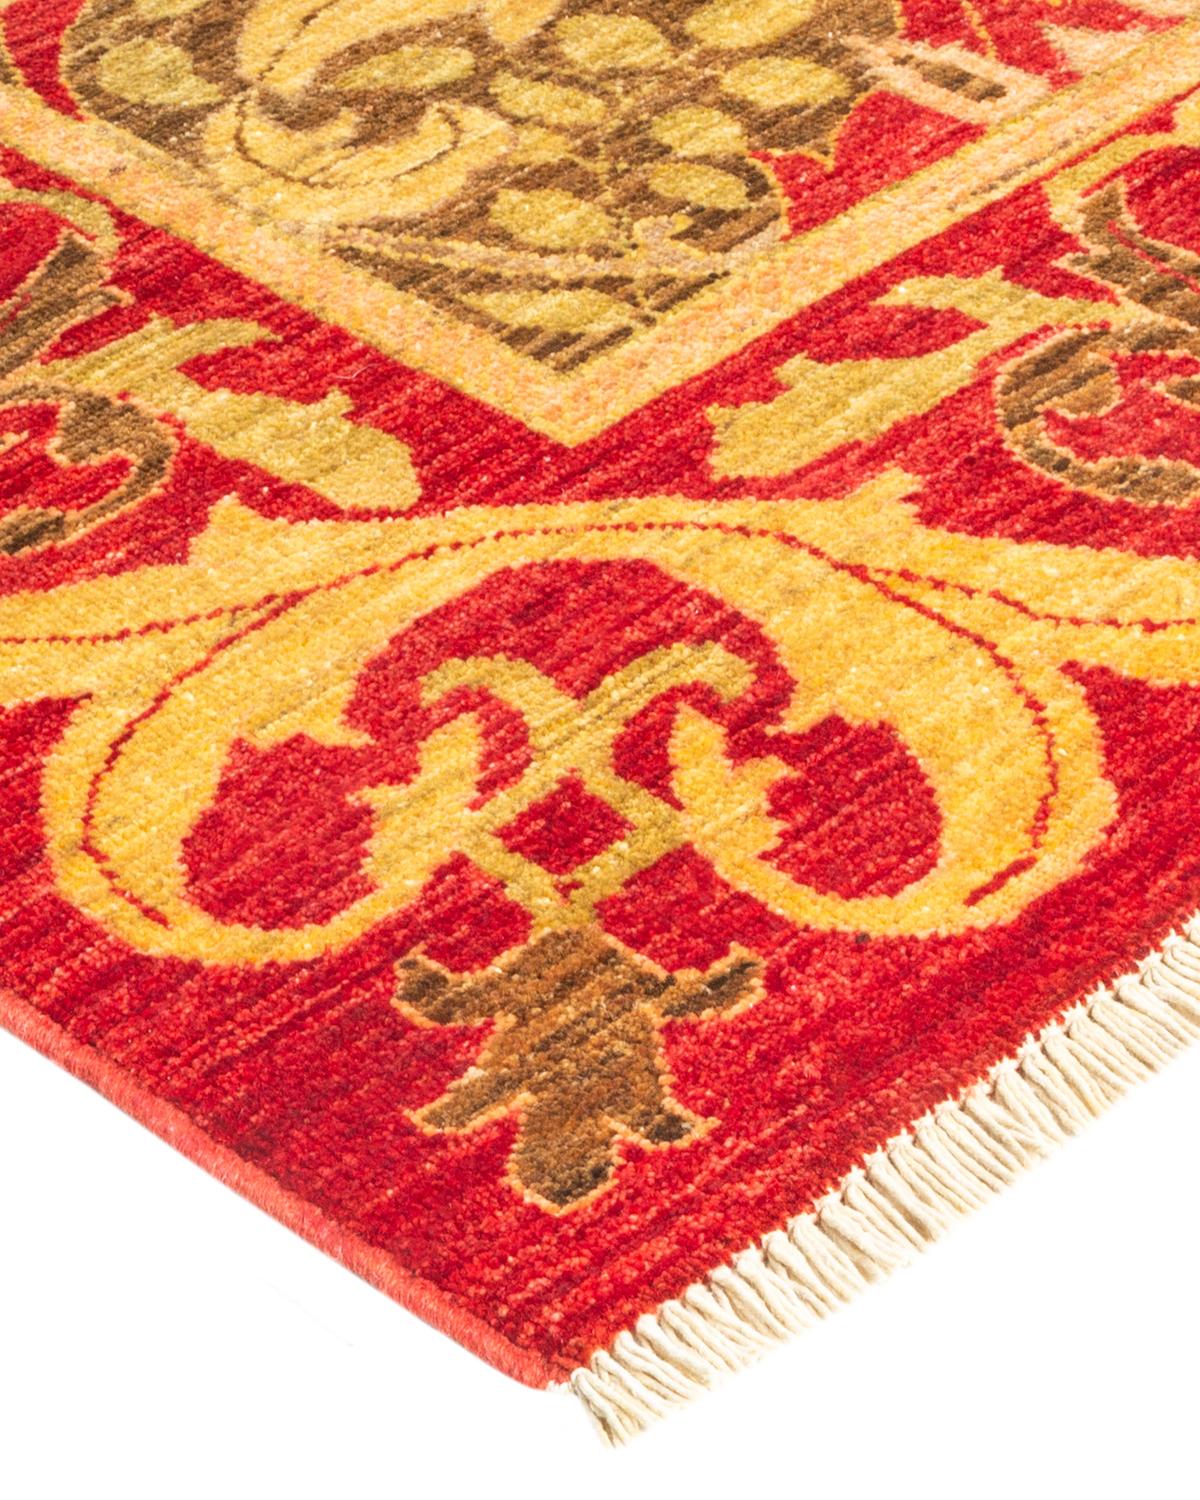 With simple, bold, yet informal designs and a broad palette of colors that ranges from earthy hues to brilliant gems, the rugs in the Arts & Crafts collection infuse a room with a sense of sophisticated rebellion. Nature-inspired motifs are the